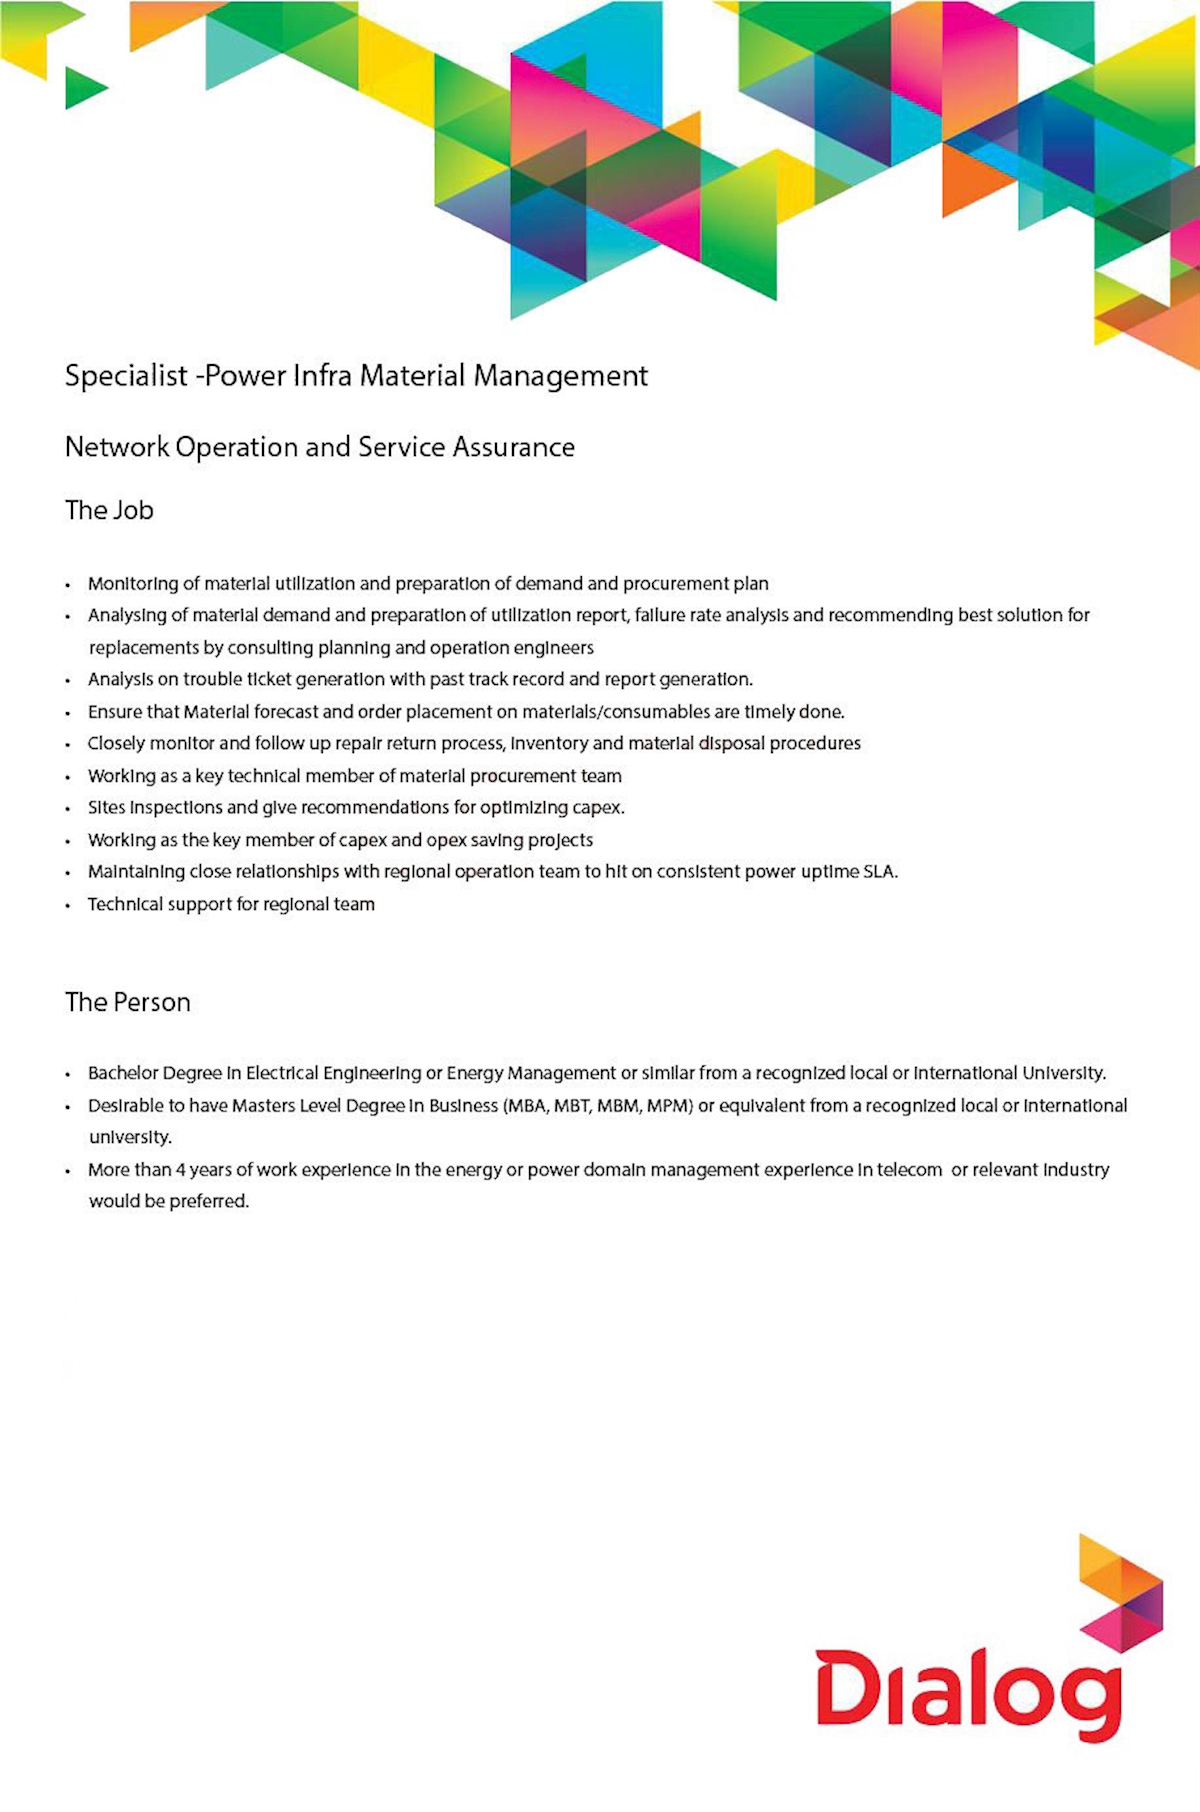 Specialist - Power Infra Material Management 